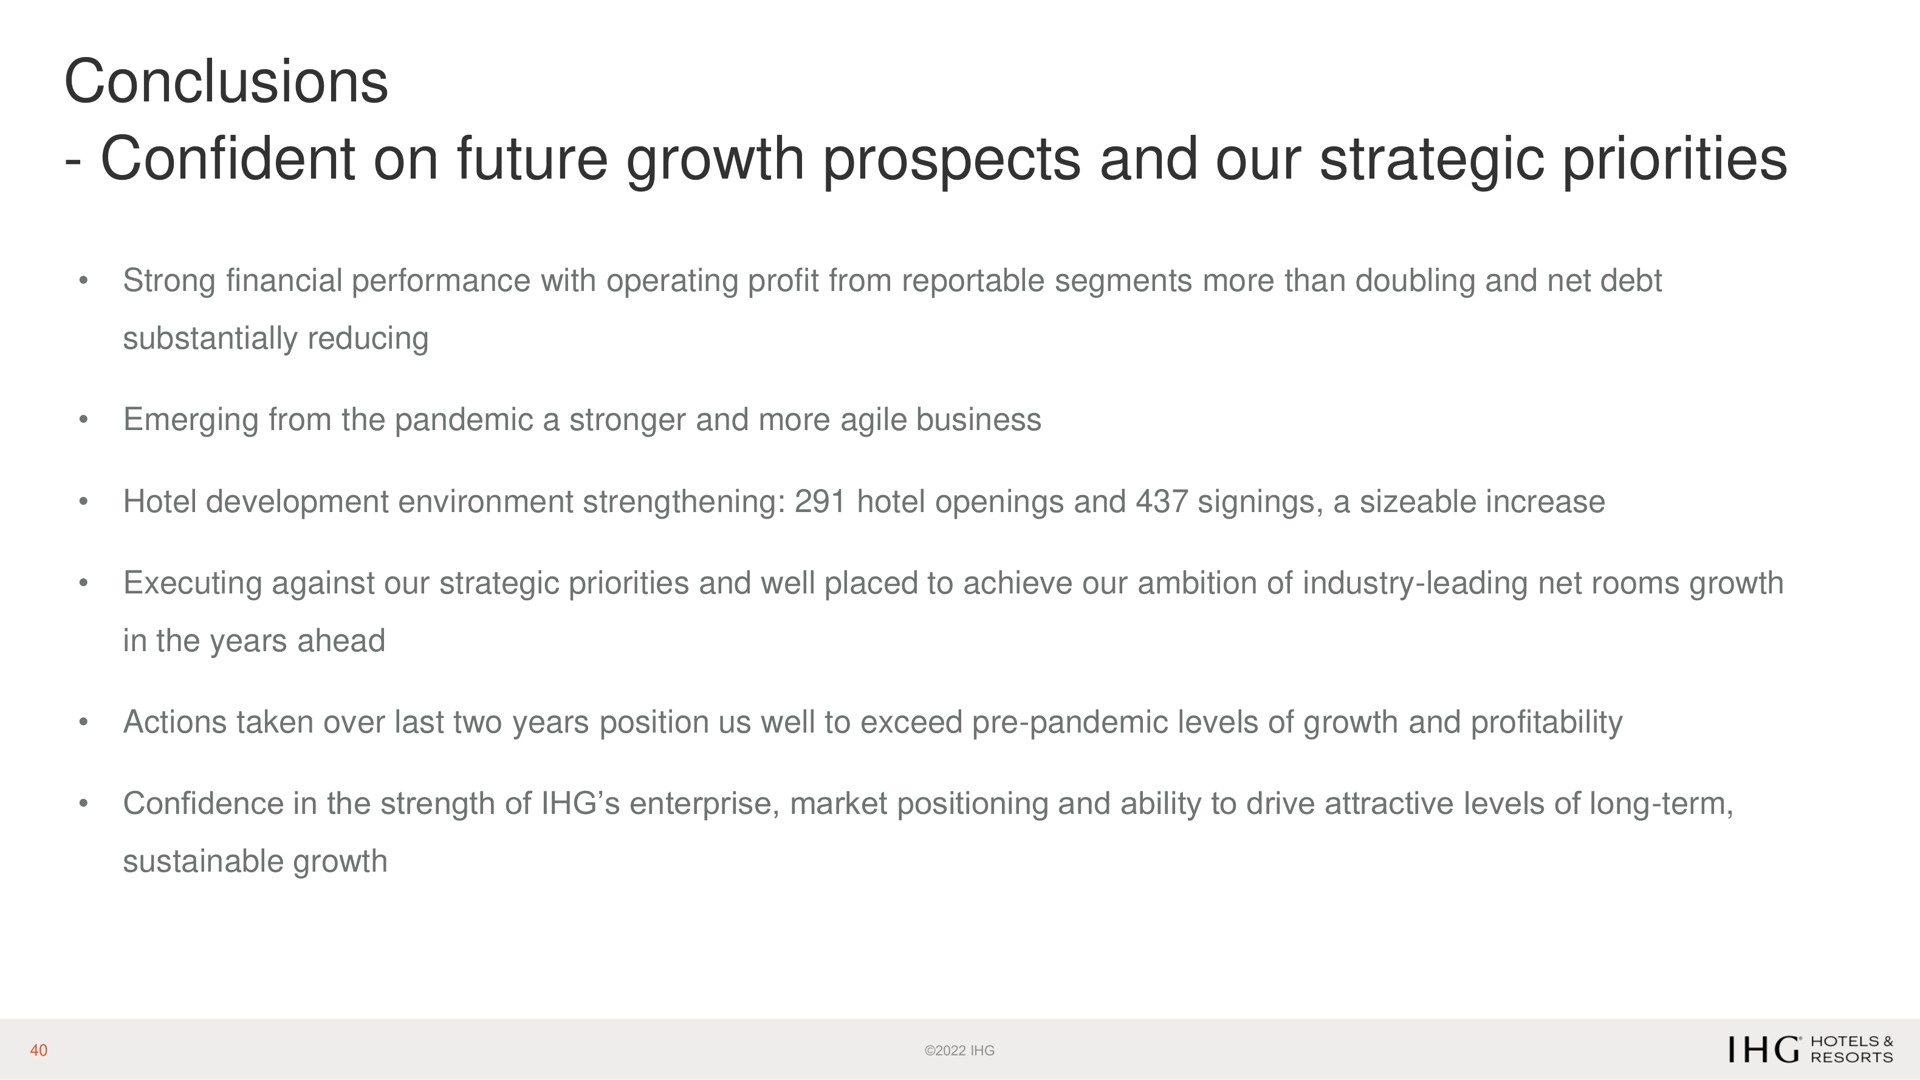 conclusions confident on future growth prospects and our strategic priorities | IHG Hotels